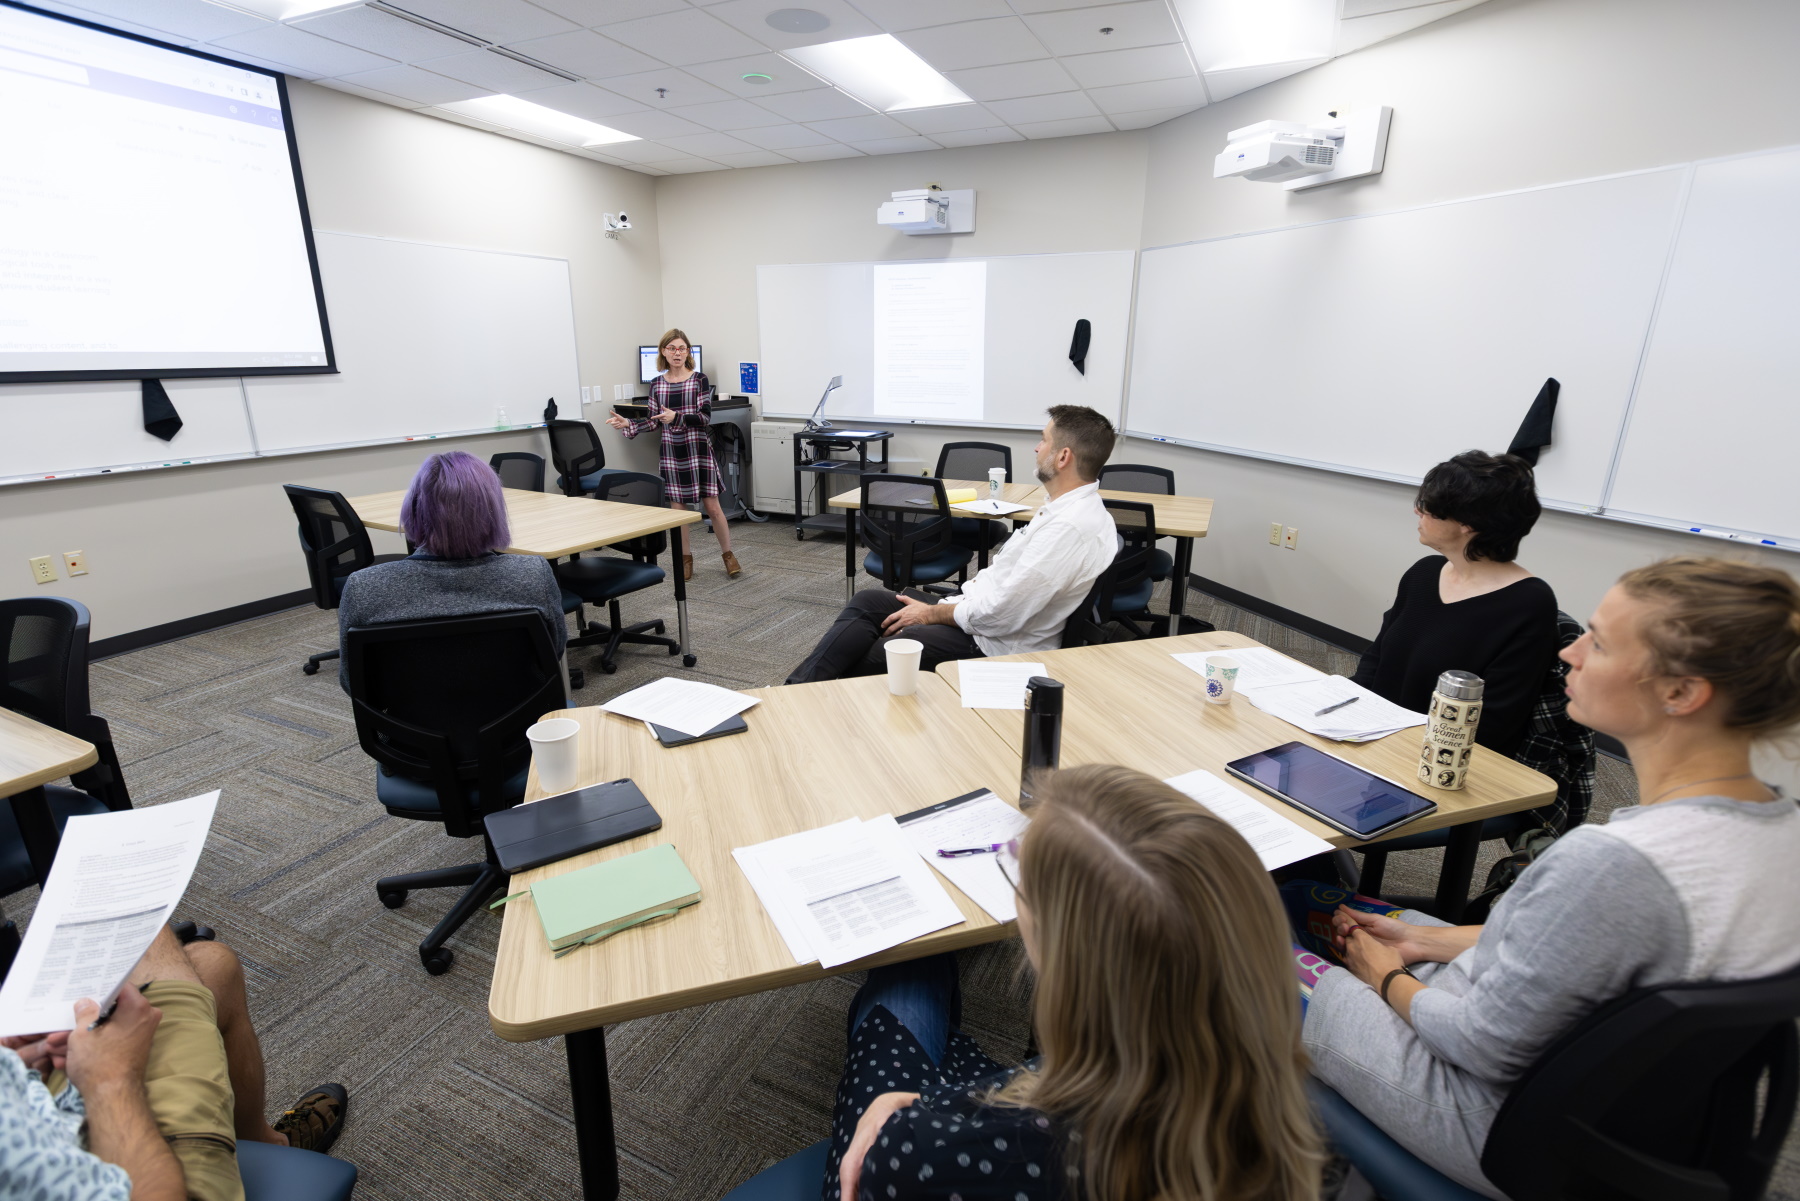 Stephanie Burdick-Shepherd leads six Lawrence faculty members in discussion in the Center for Teaching Excellence classroom in Briggs Hall.